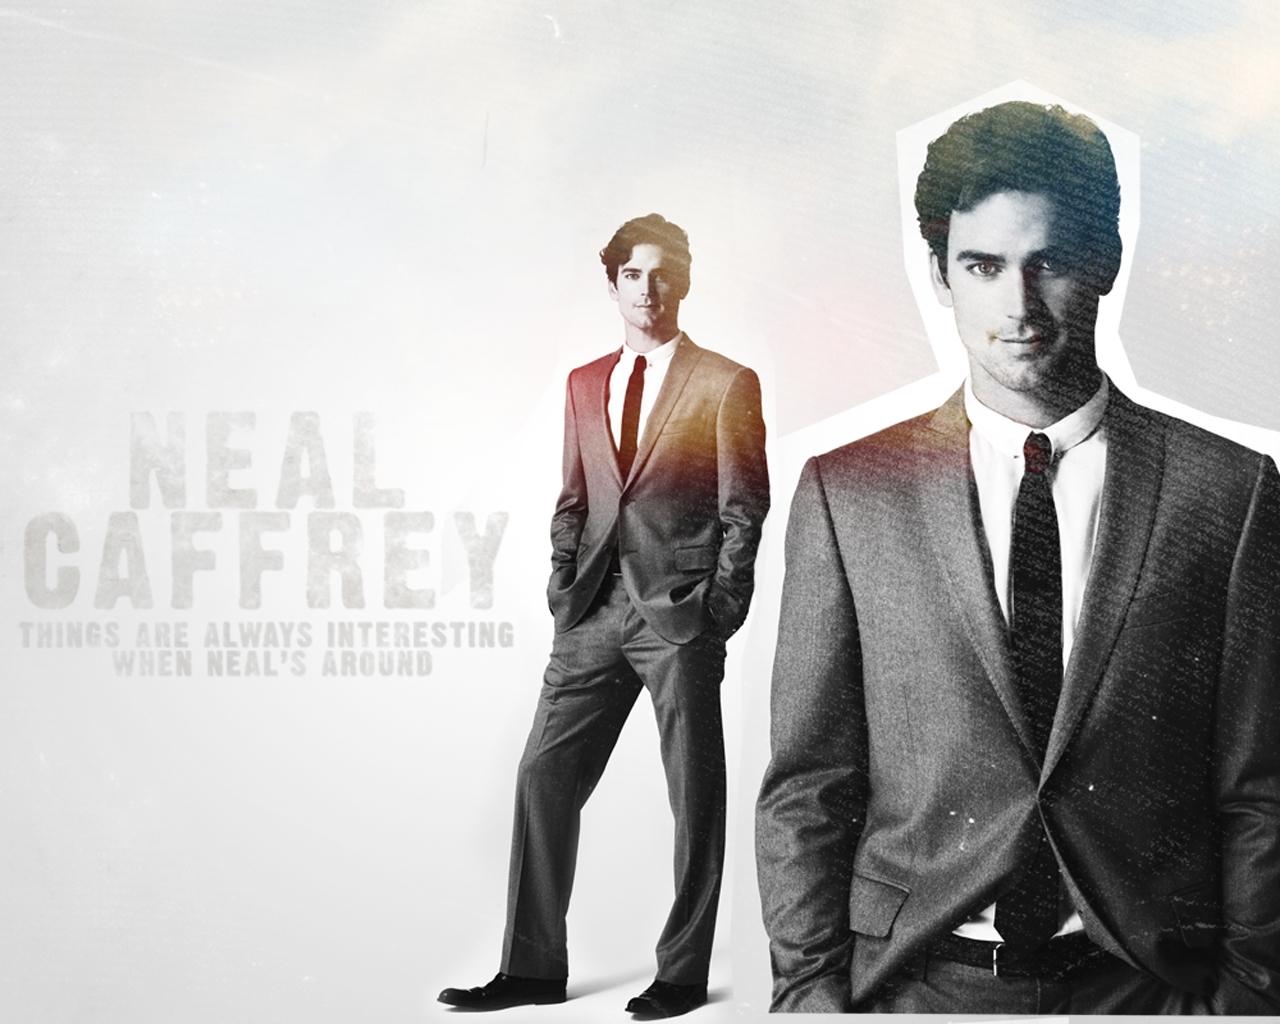 Wallpaper Of White Collar You Are Ing